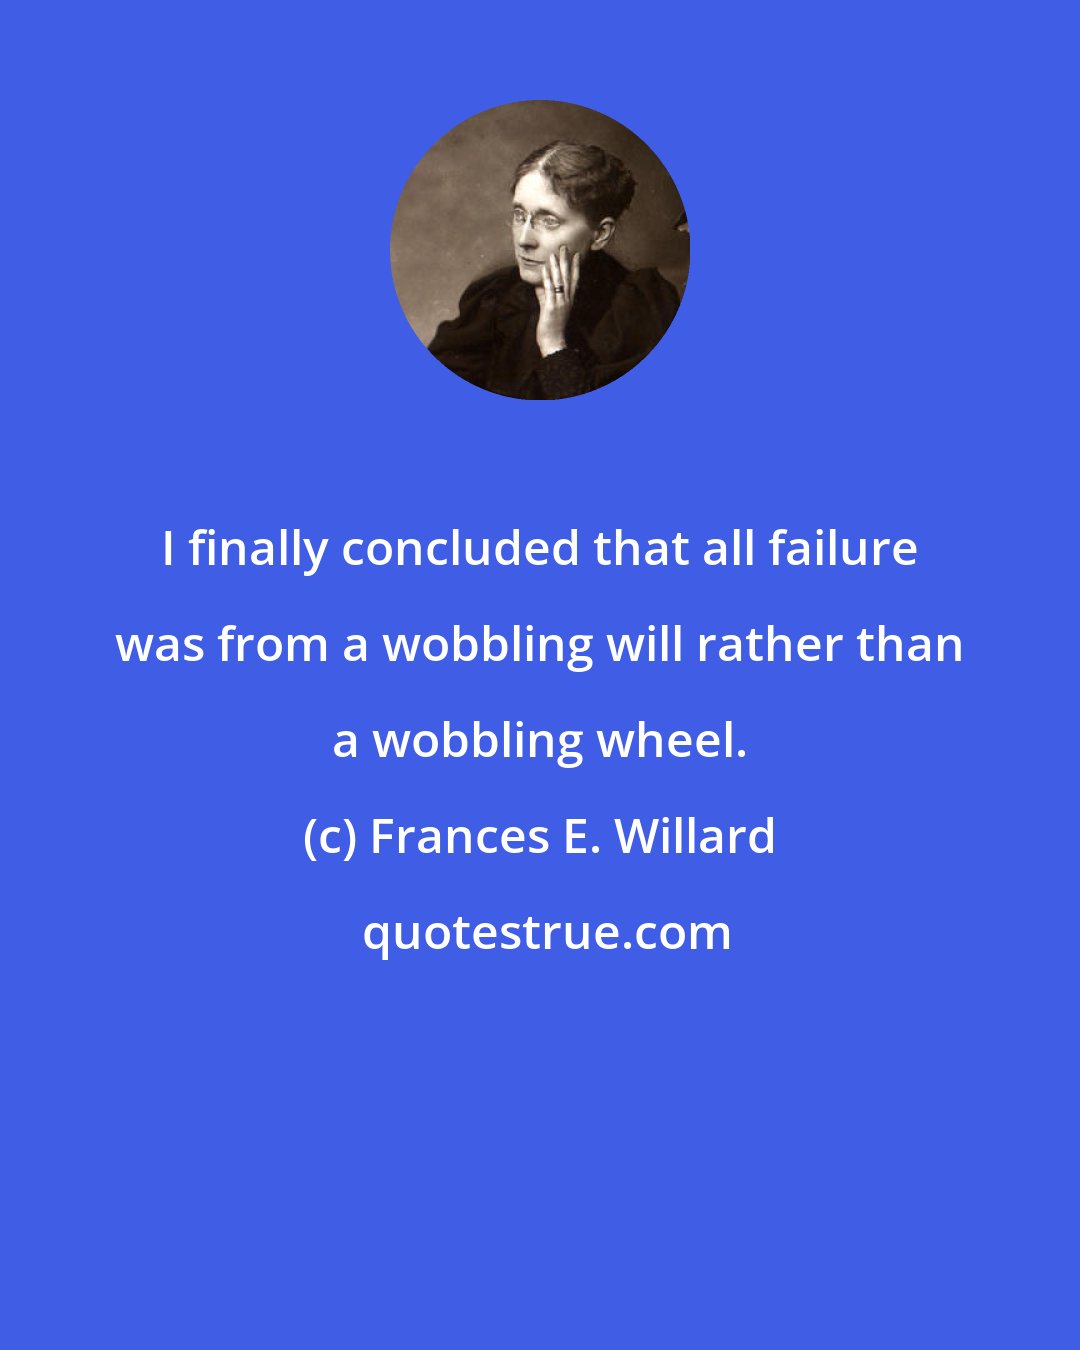 Frances E. Willard: I finally concluded that all failure was from a wobbling will rather than a wobbling wheel.